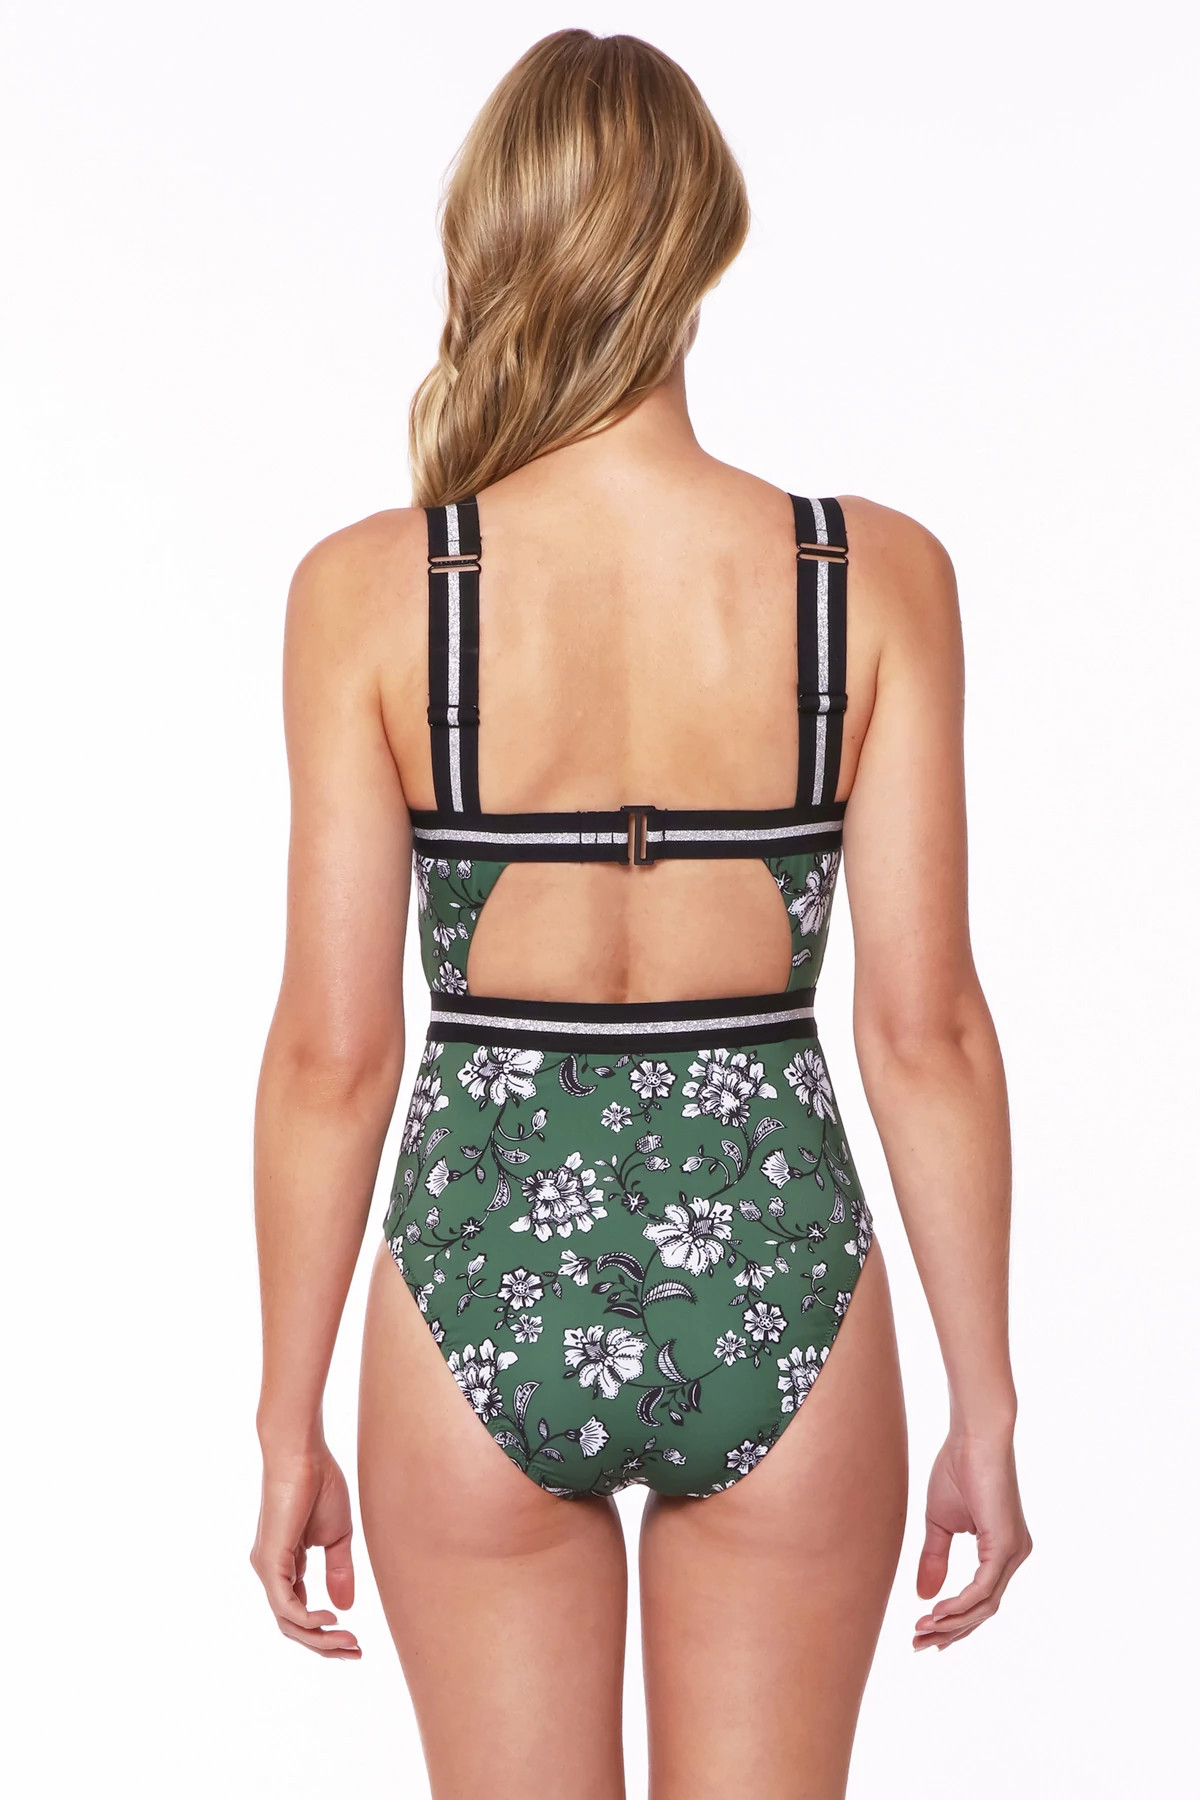 CACTUS GREEN Floral Monokini Cutout One Piece Swimsuit image number 2